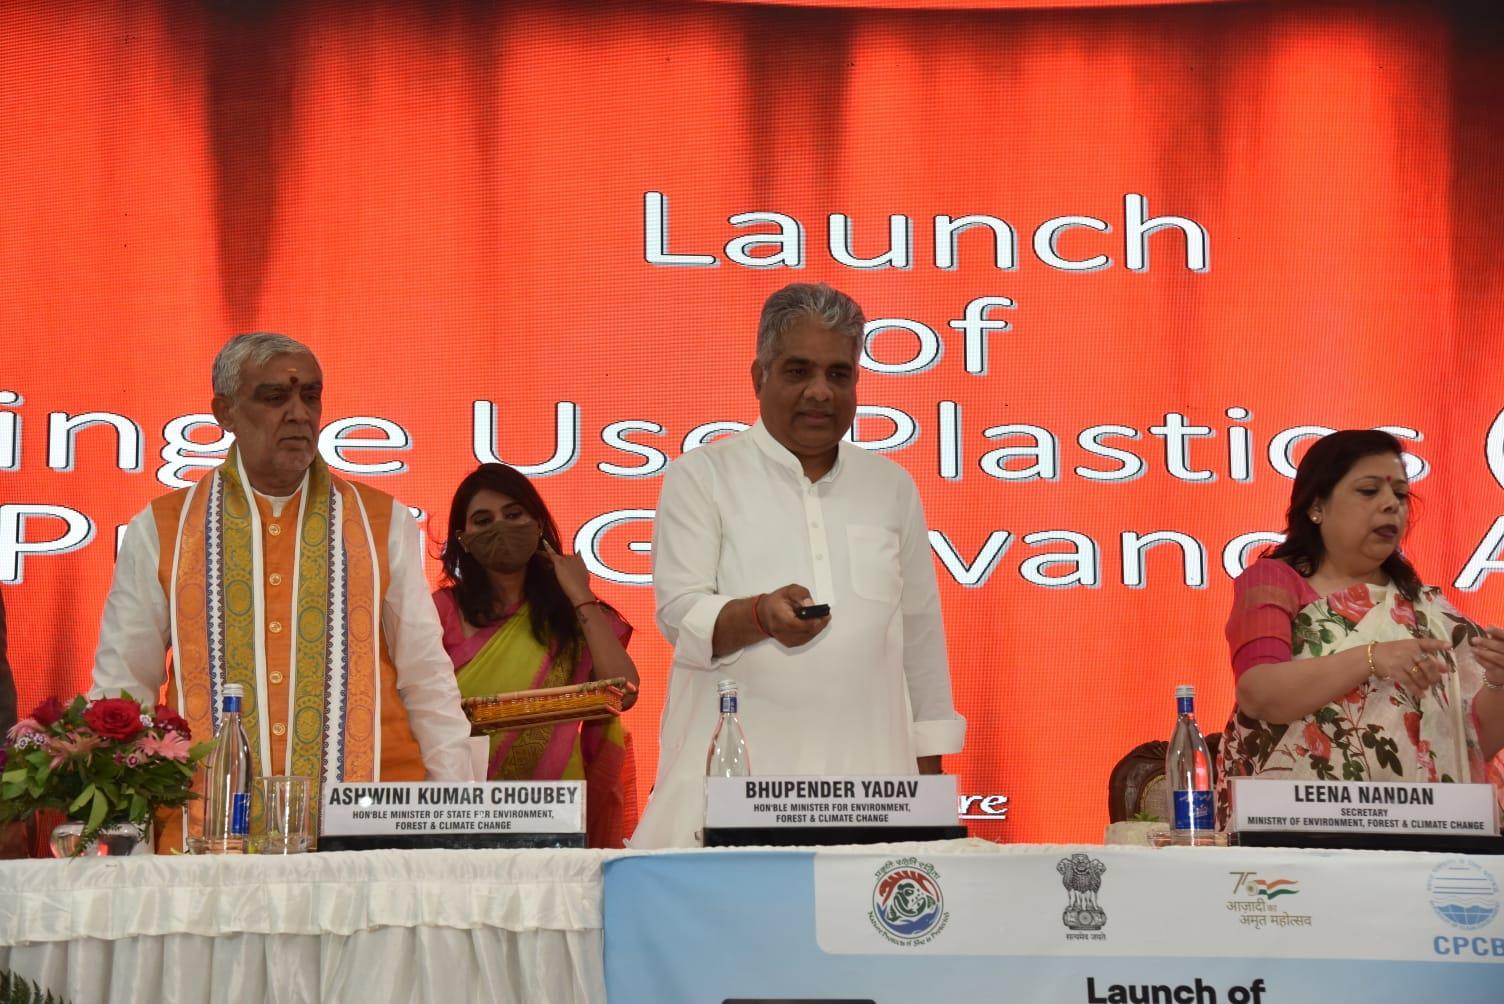 The Environment Minister announces the launch of the ‘Prakriti’ green initiative